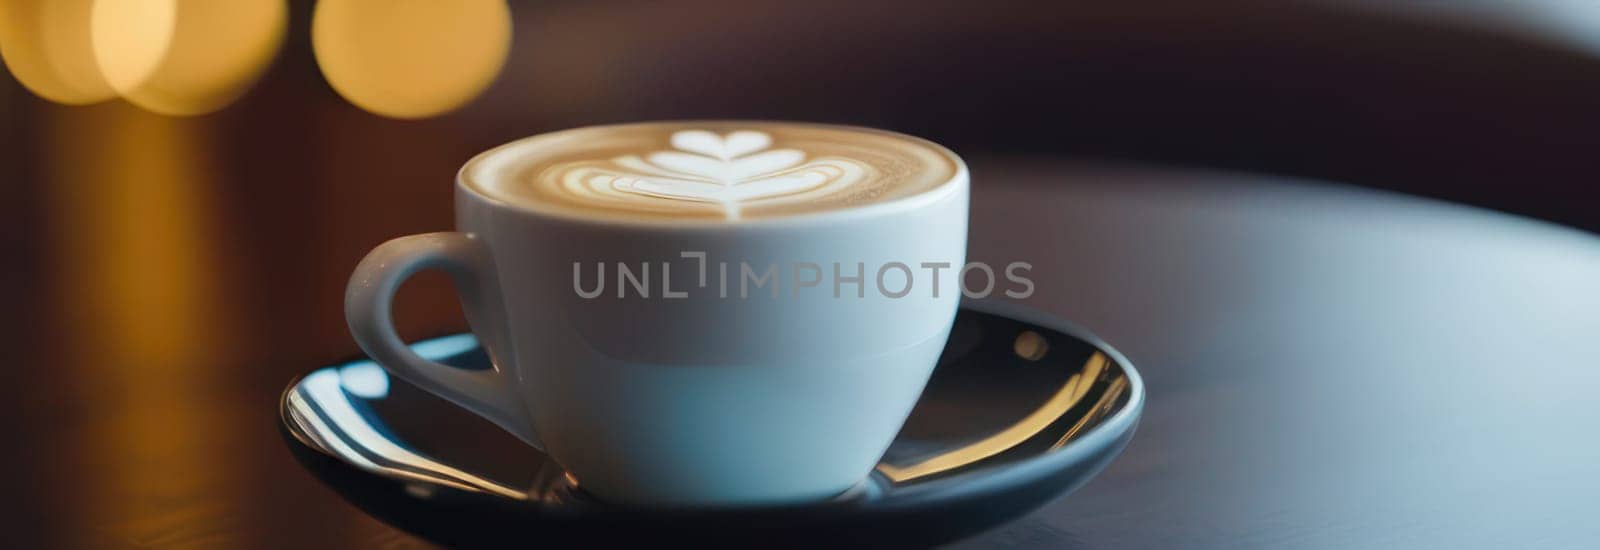 Cup of hot coffee on dark background.Long photo banner for website header design with copy space. Cafe menu concept idea background